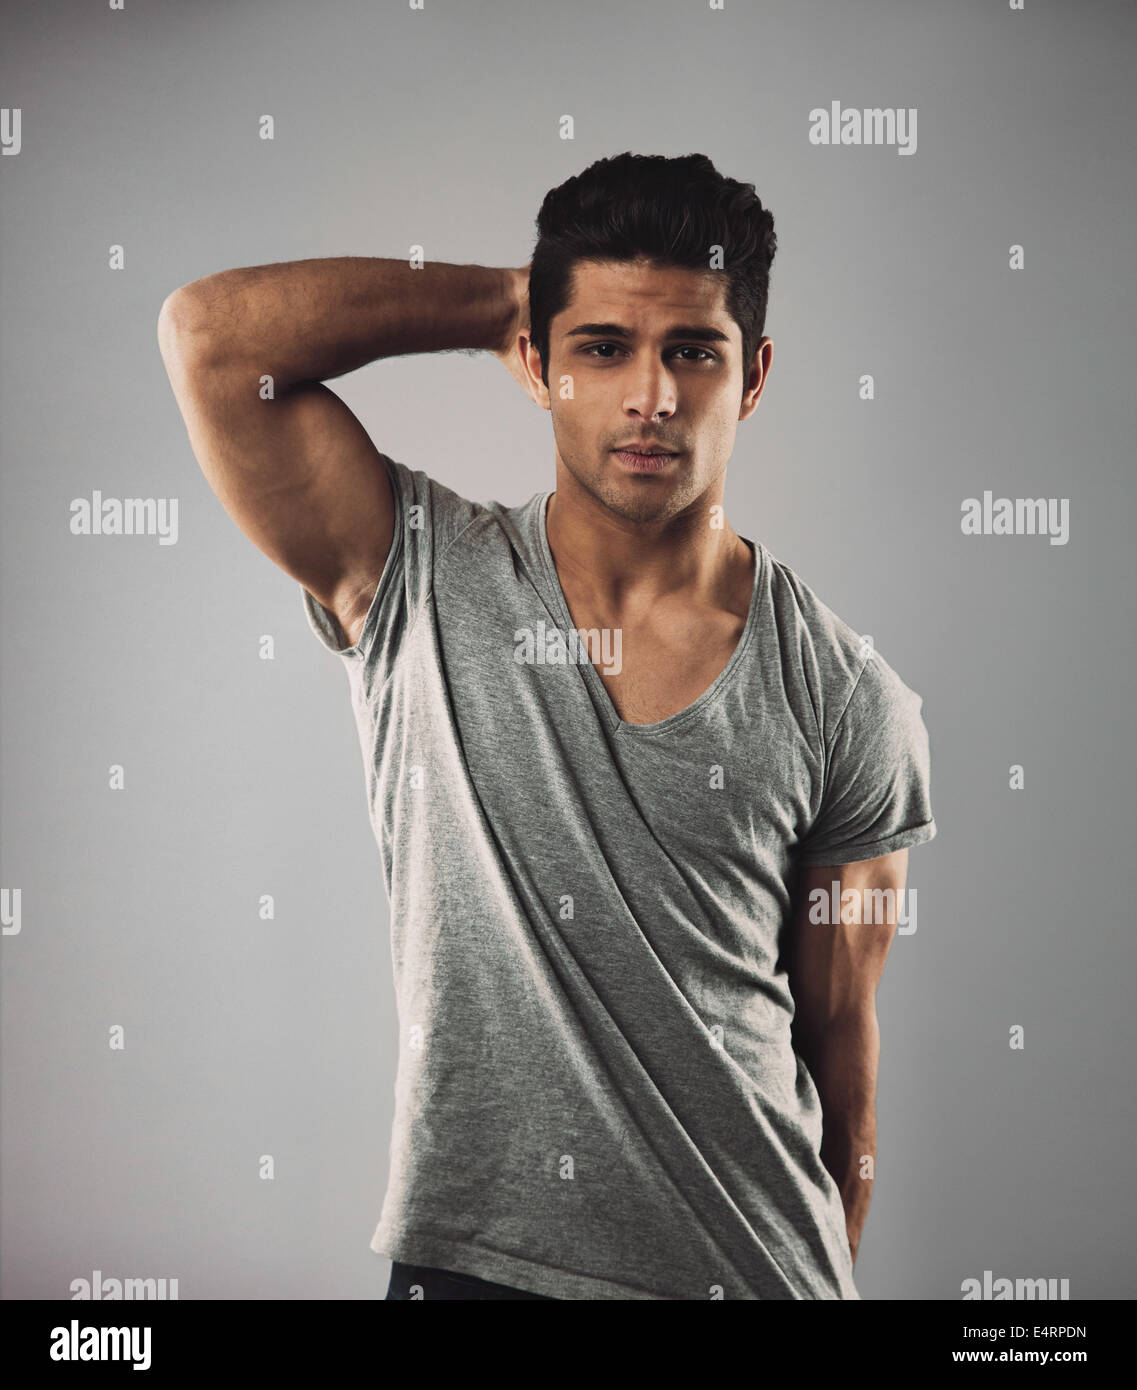 Portrait of handsome young man posing against grey background. Hispanic male fashion model looking at camera. Stock Photo